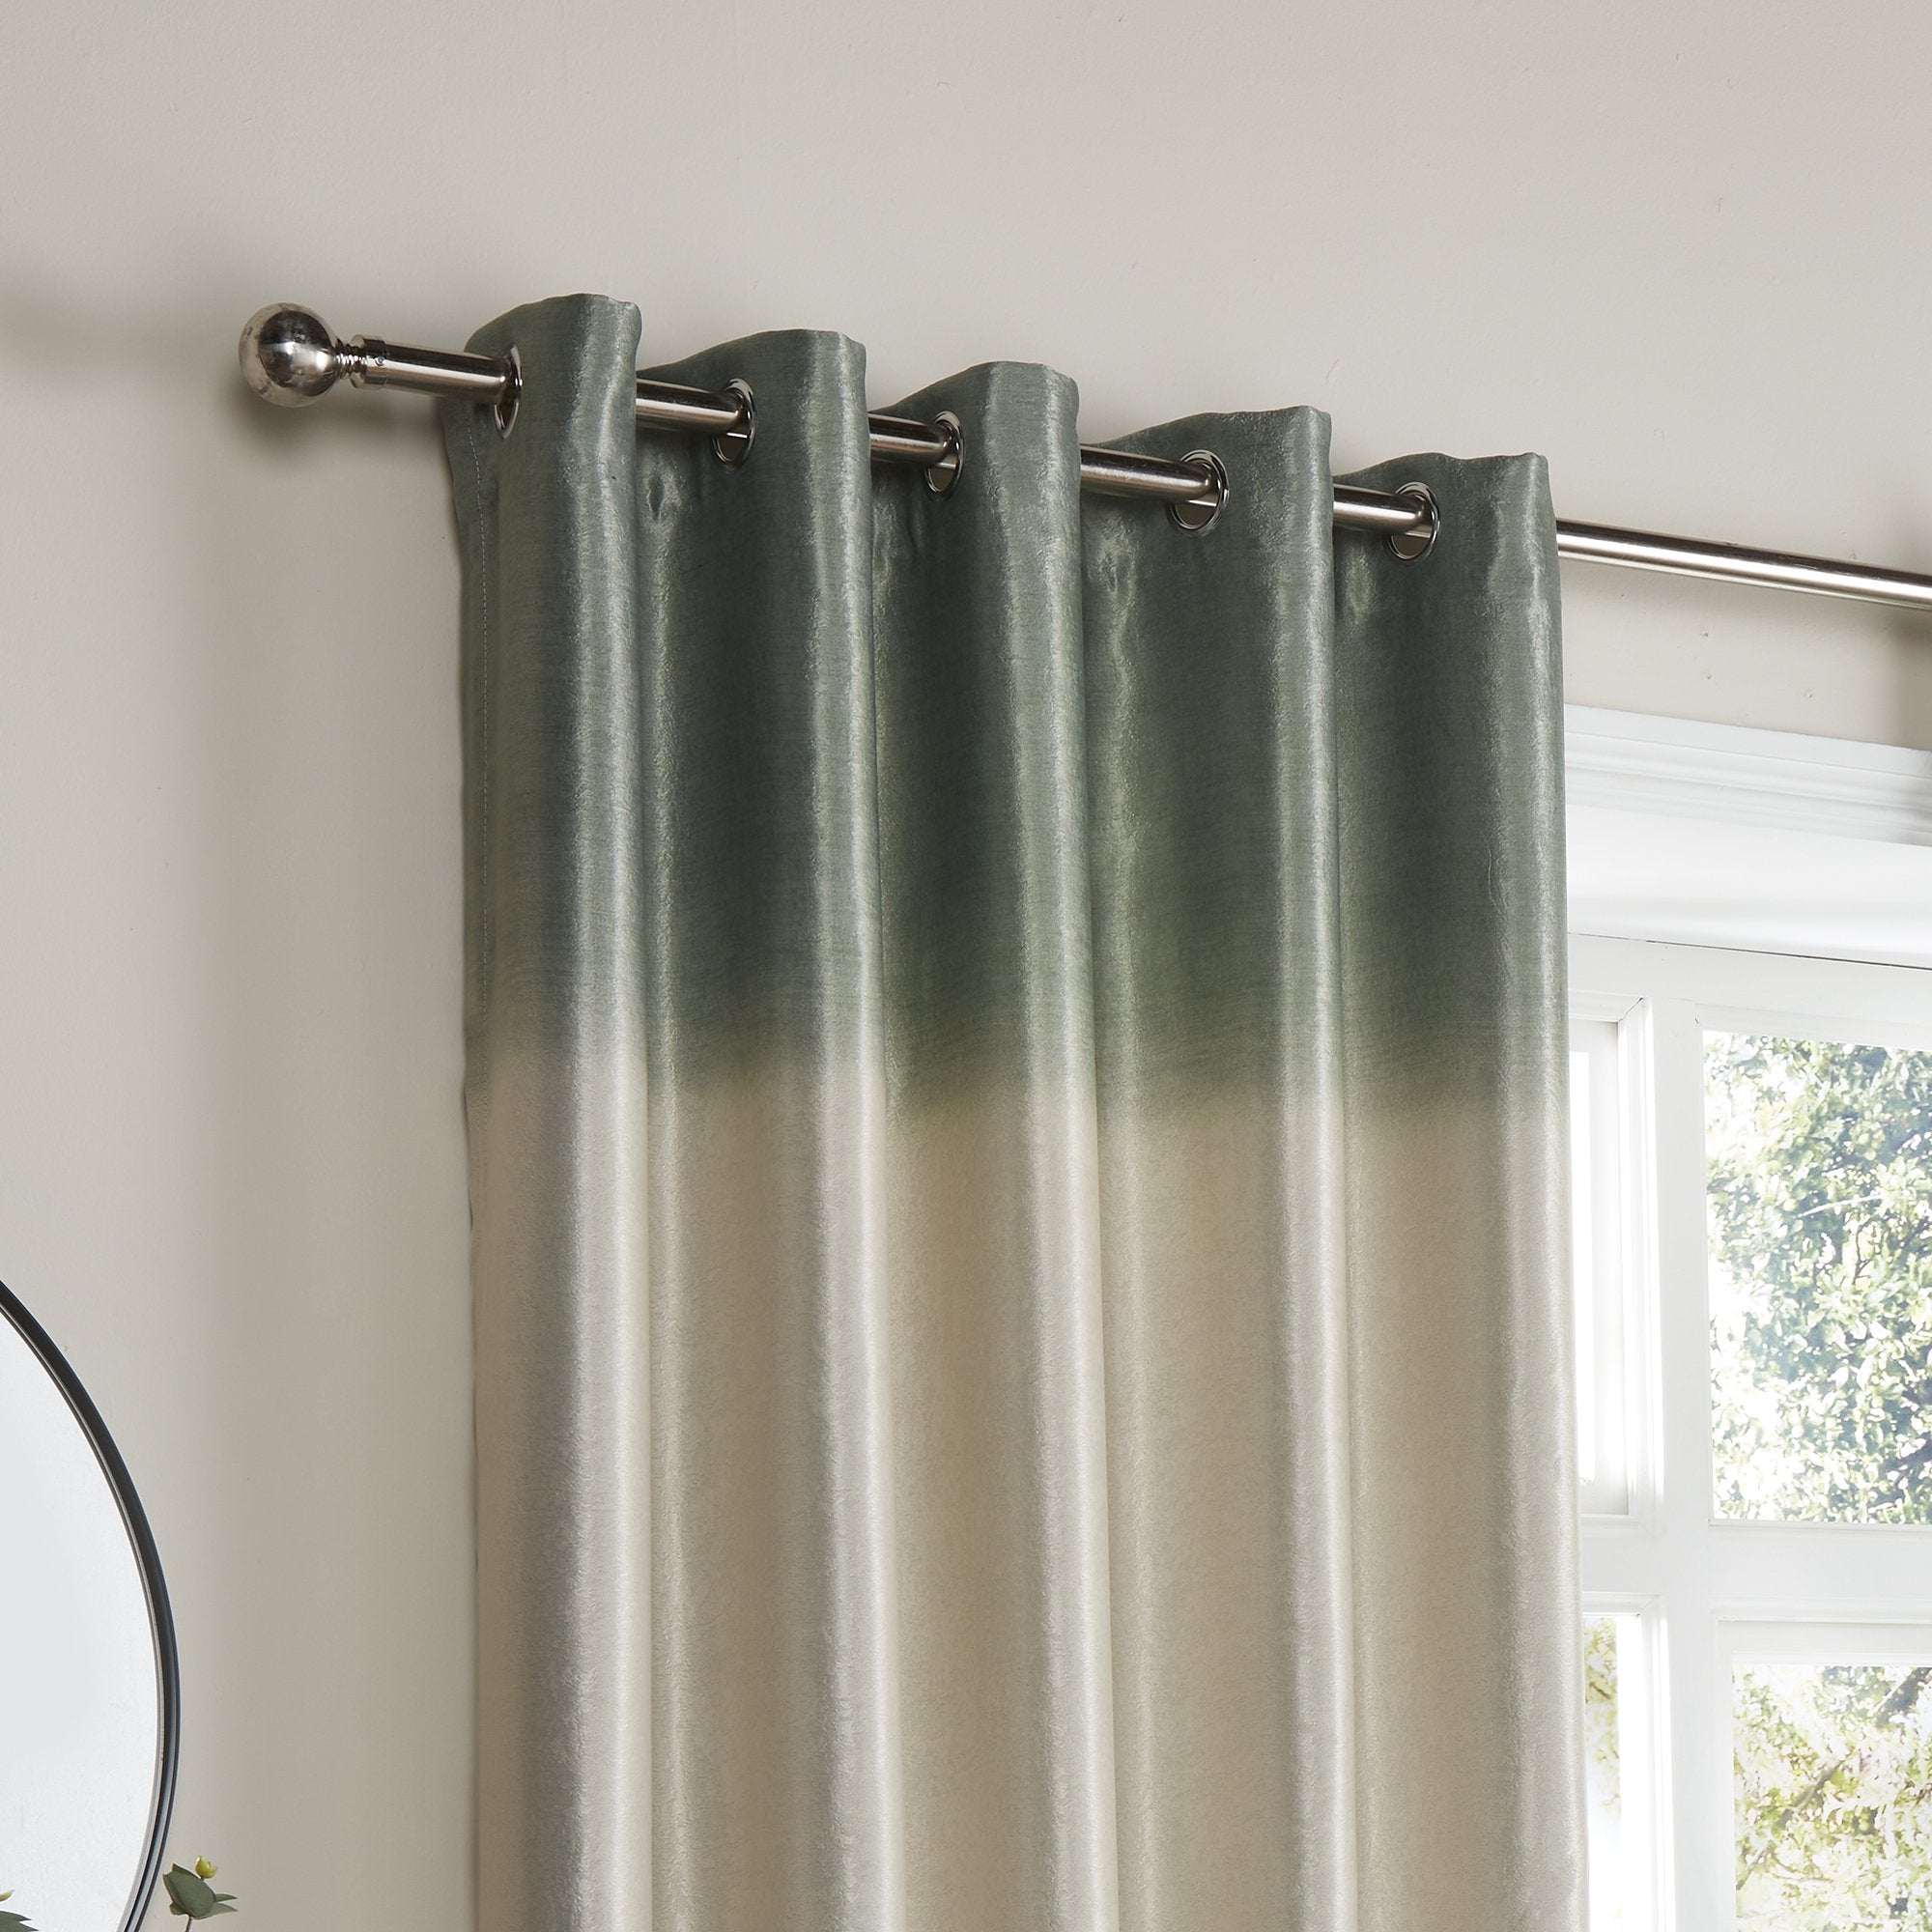 Pair of Eyelet Curtains Ombre Strata by Fusion in Green